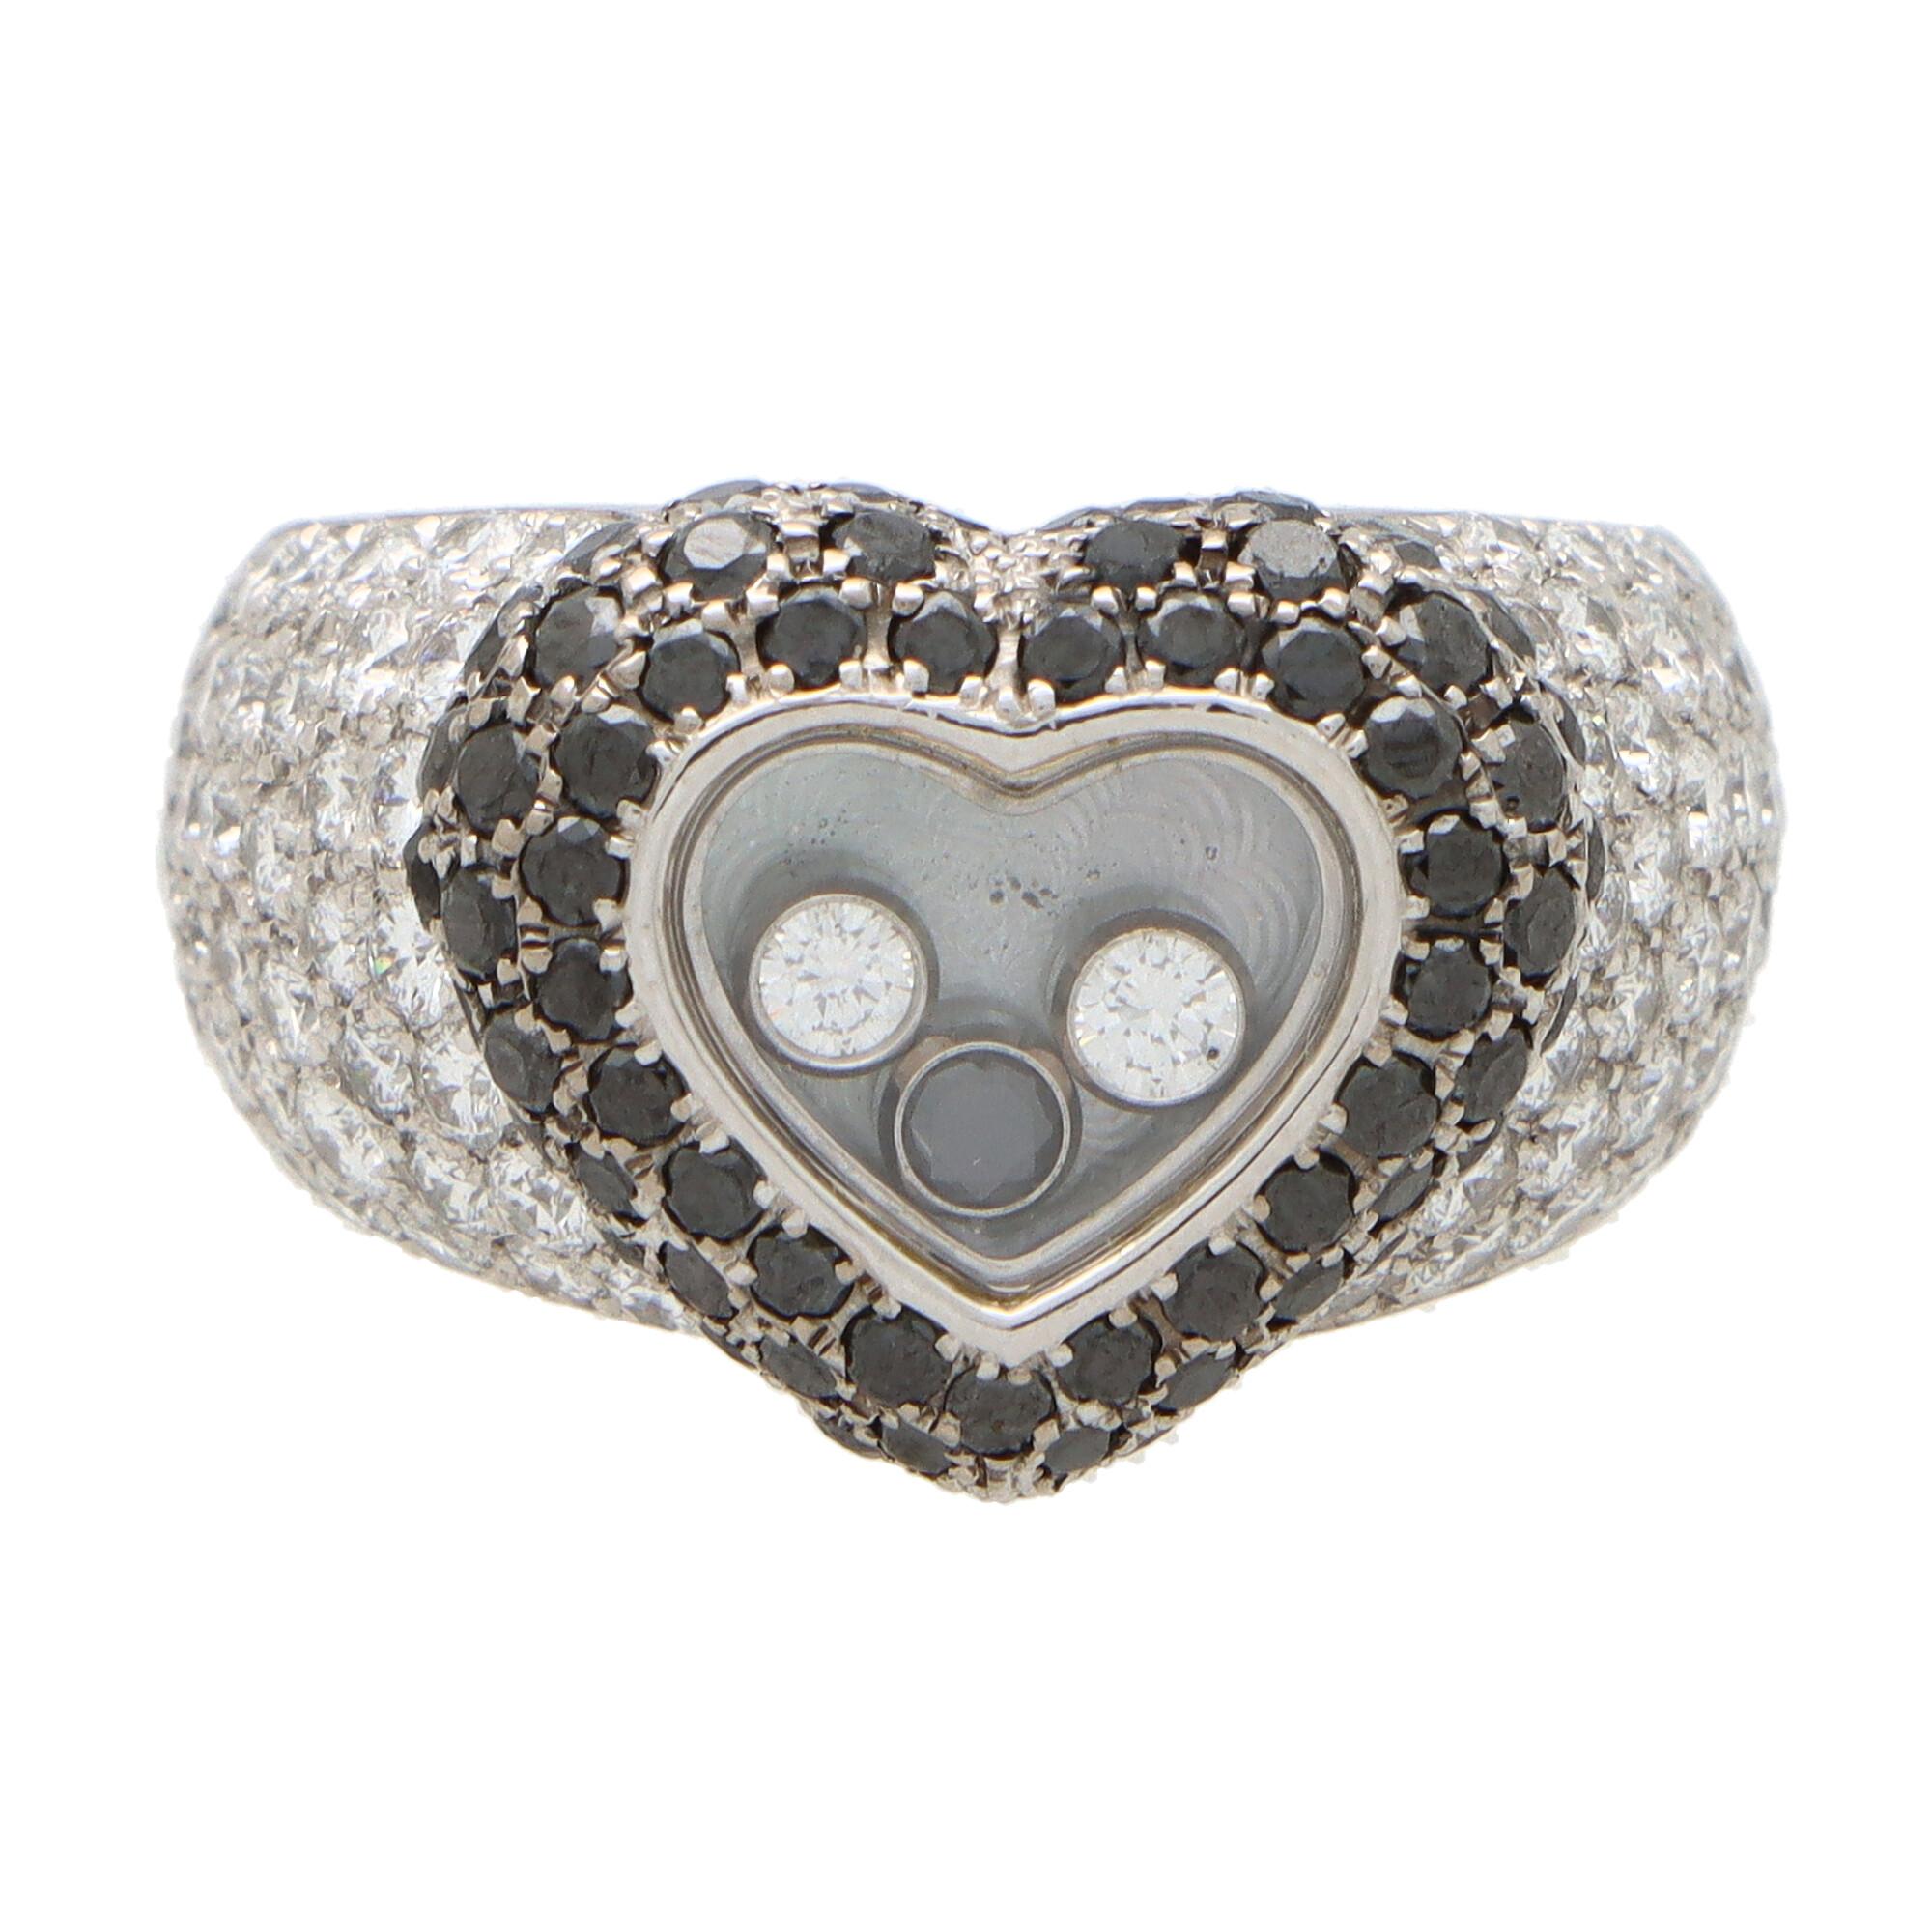 A unique vintage Chopard black and white diamond ‘Happy Diamonds’ ring set in 18k white gold. 

The ring depicts an open-heart motif with three floating rub-over set diamonds to centre. The diamonds float in a crystal topped casing and the heart is